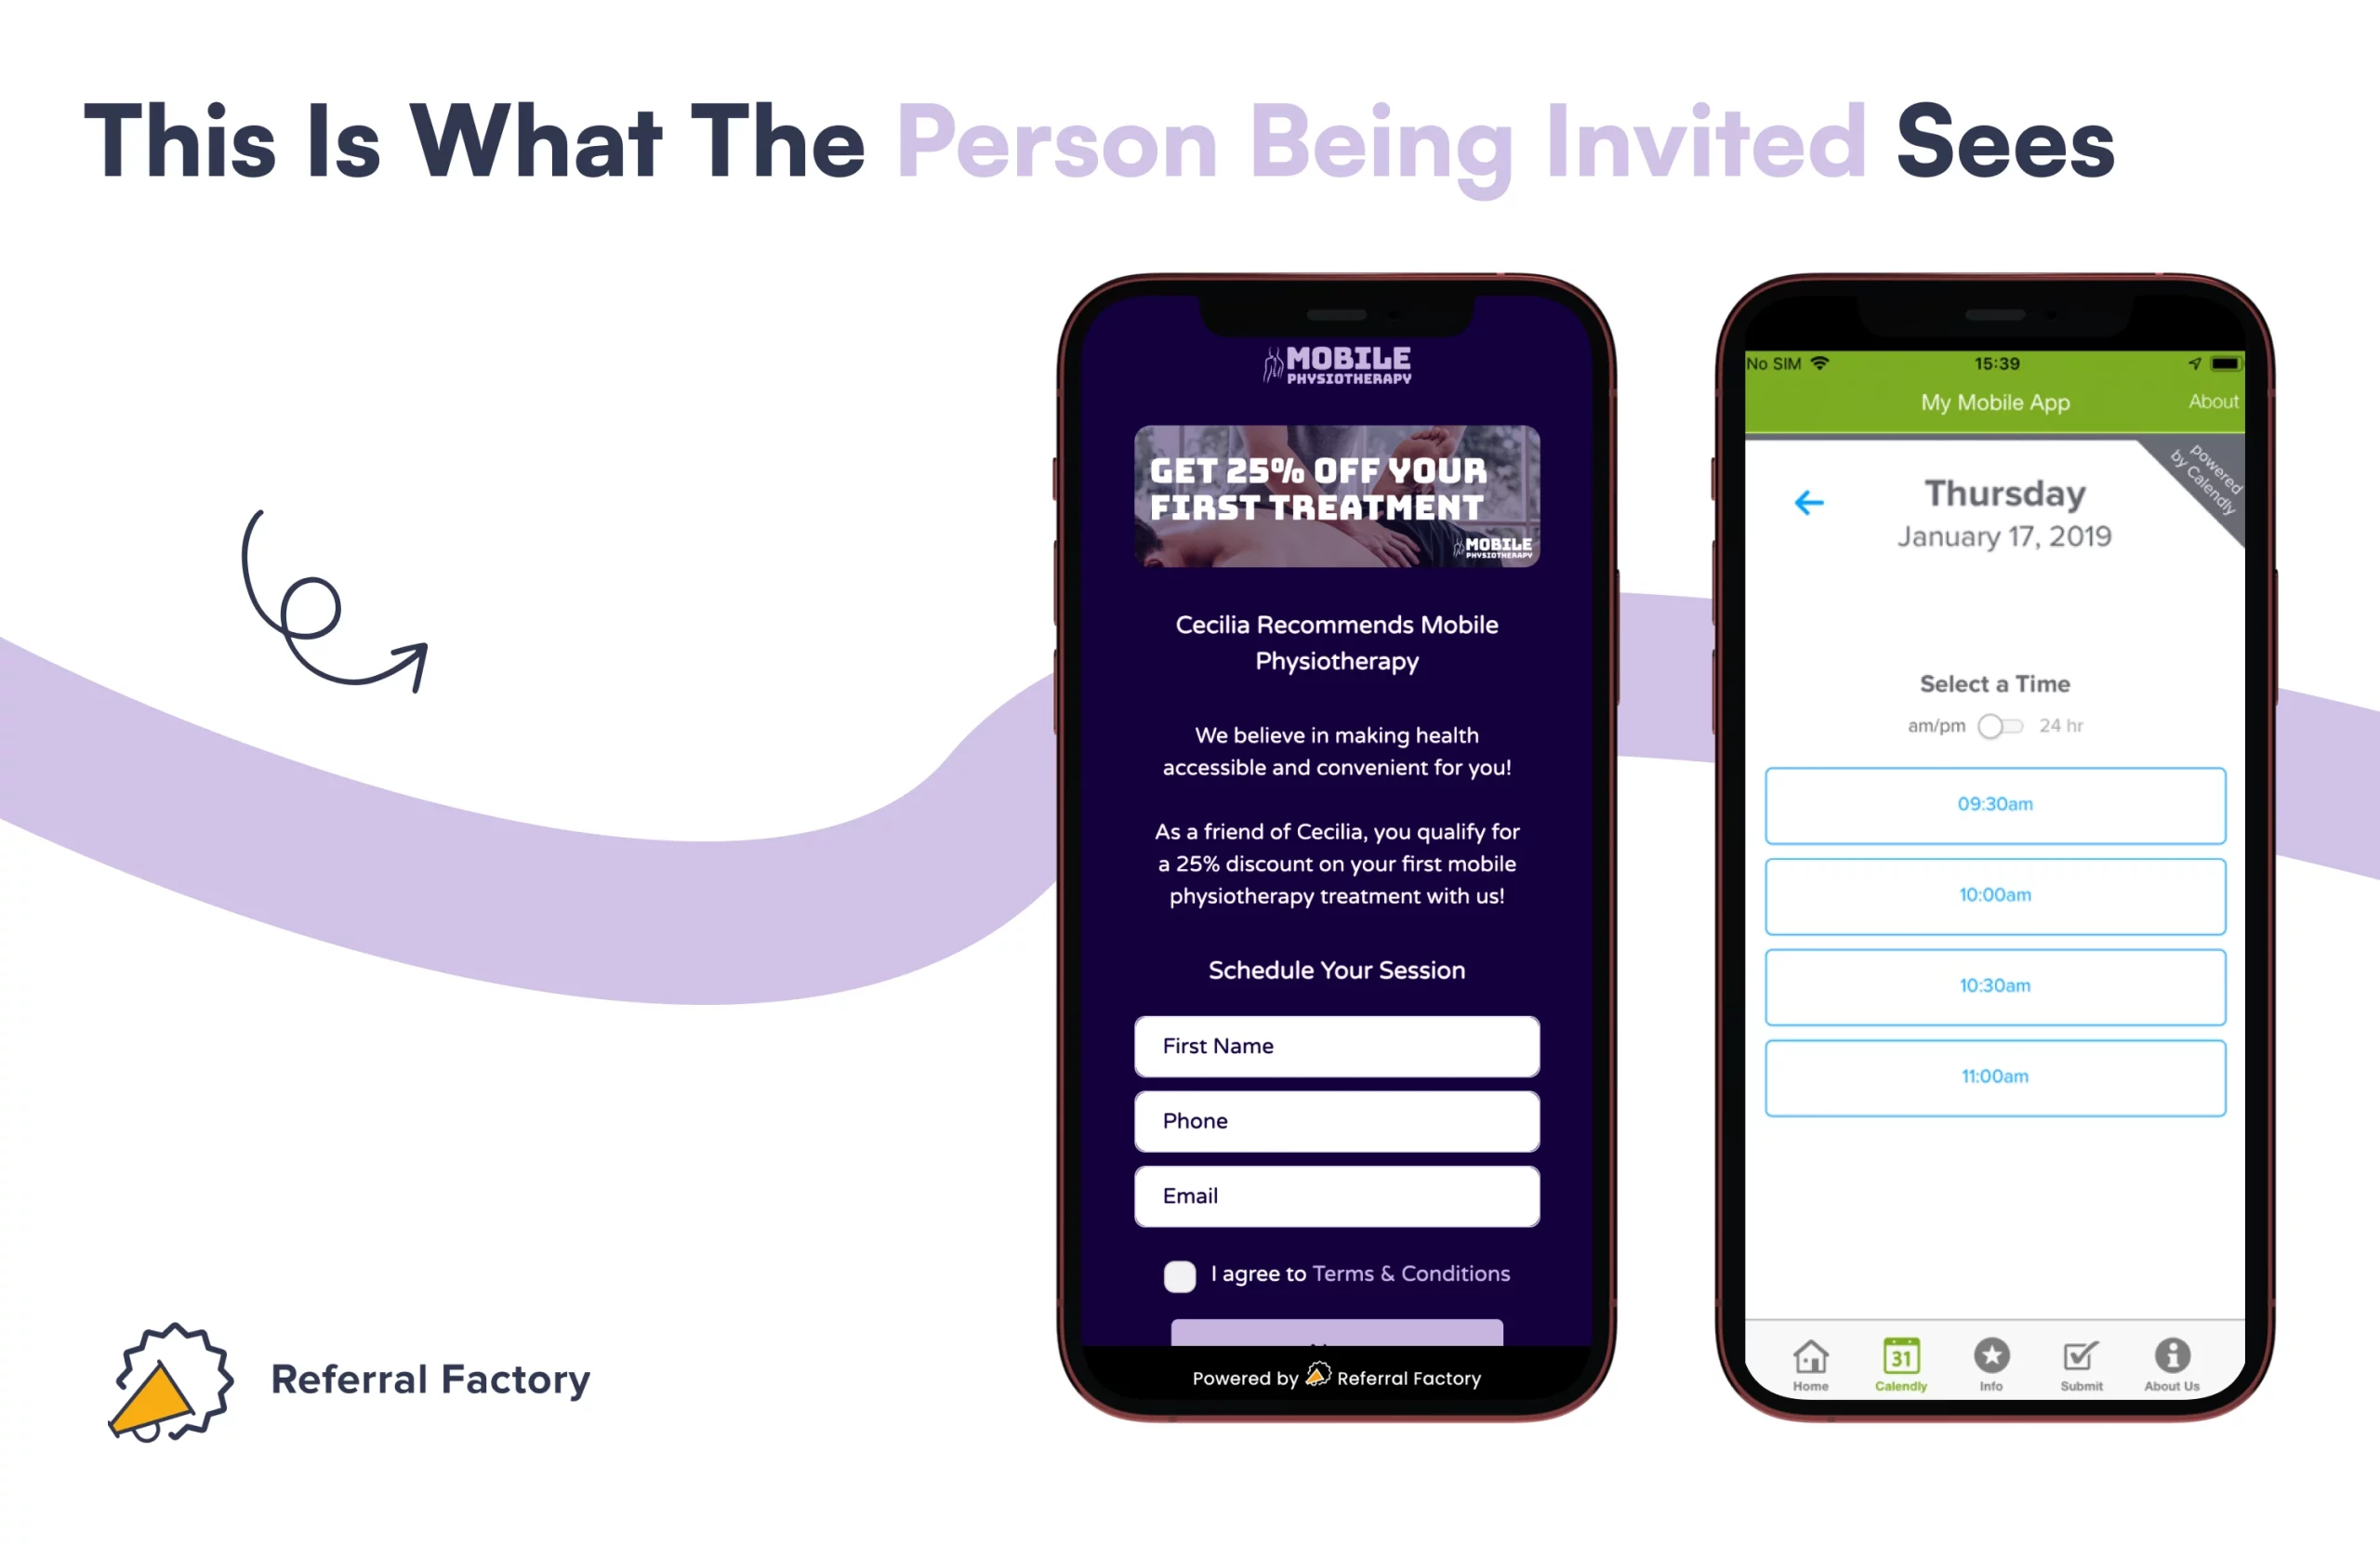 referral program case study healthcare business smb pages for the person invited referral factory